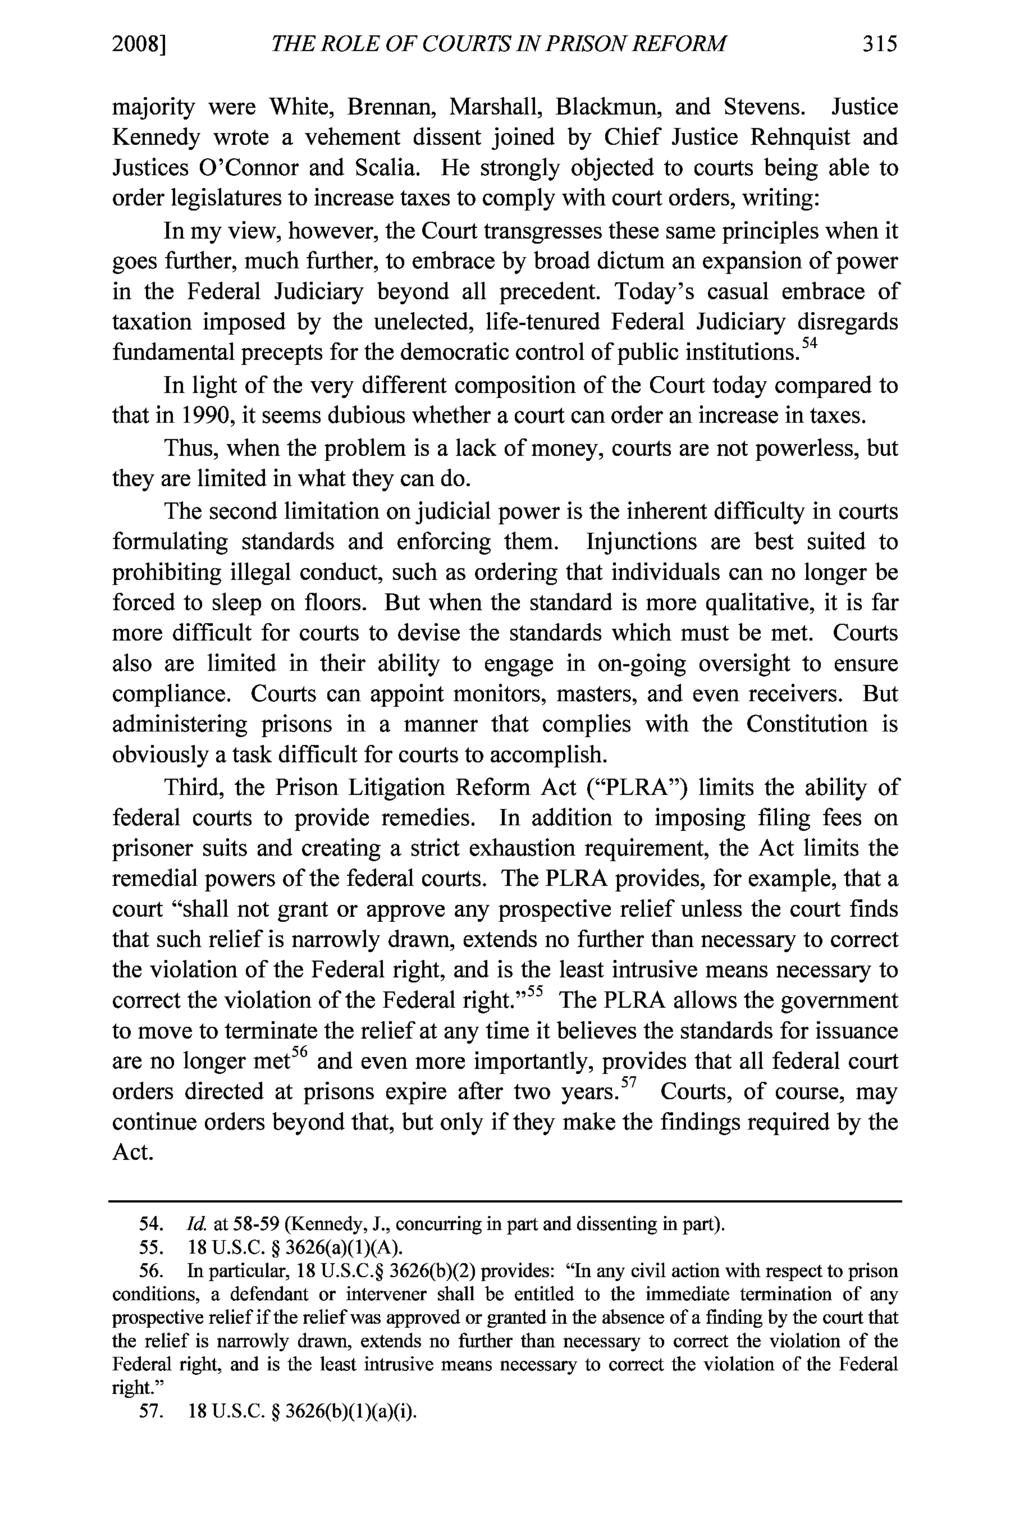 2008] THE ROLE OF COURTS IN PRISON REFORM Chemerinsky: The Essential but Inherently Limited Role of the Courts in Prison majority were White, Brennan, Marshall, Blackmun, and Stevens.